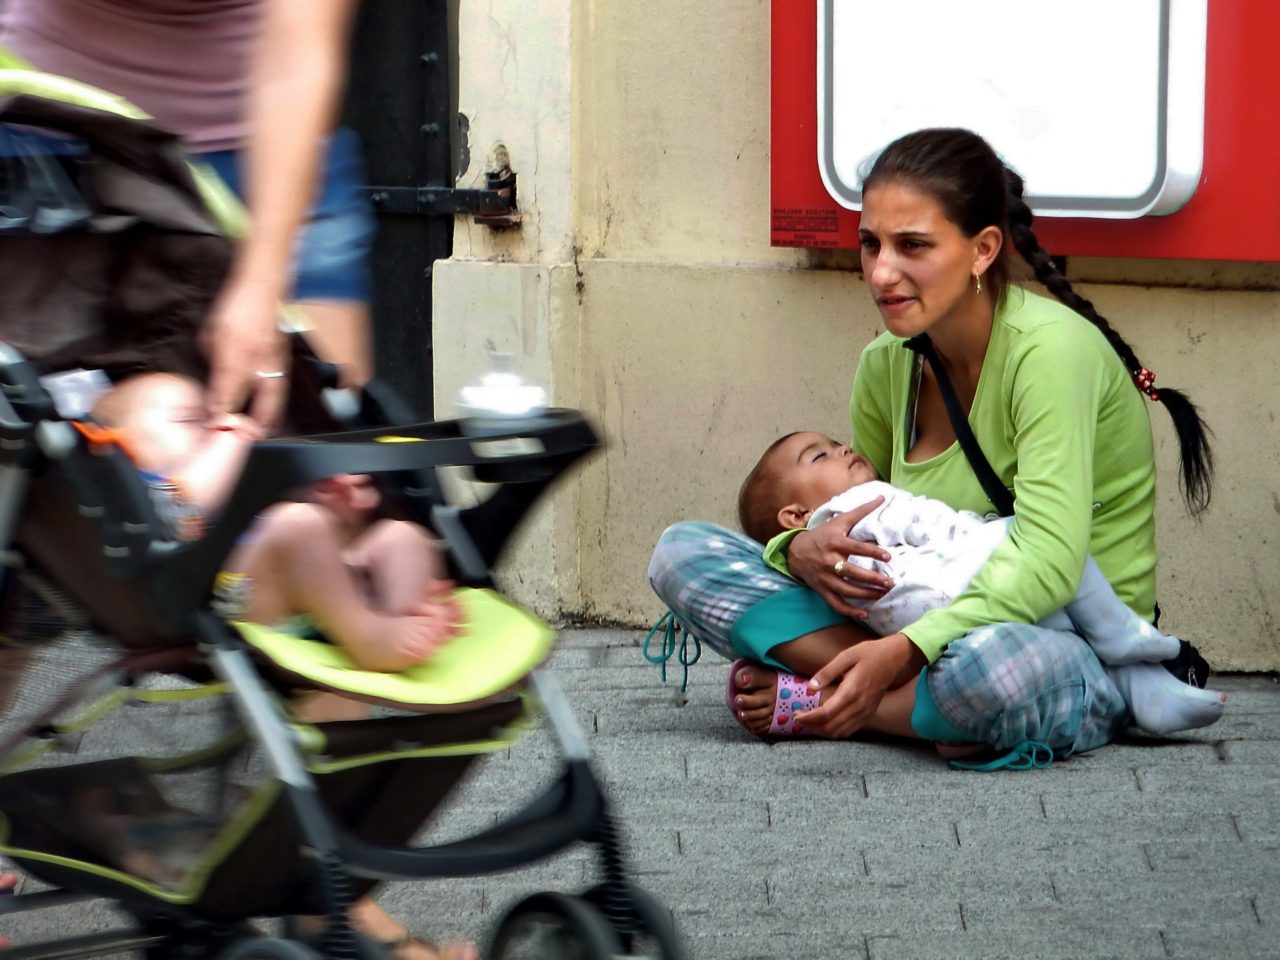 mom and baby experiencing homelessness on street